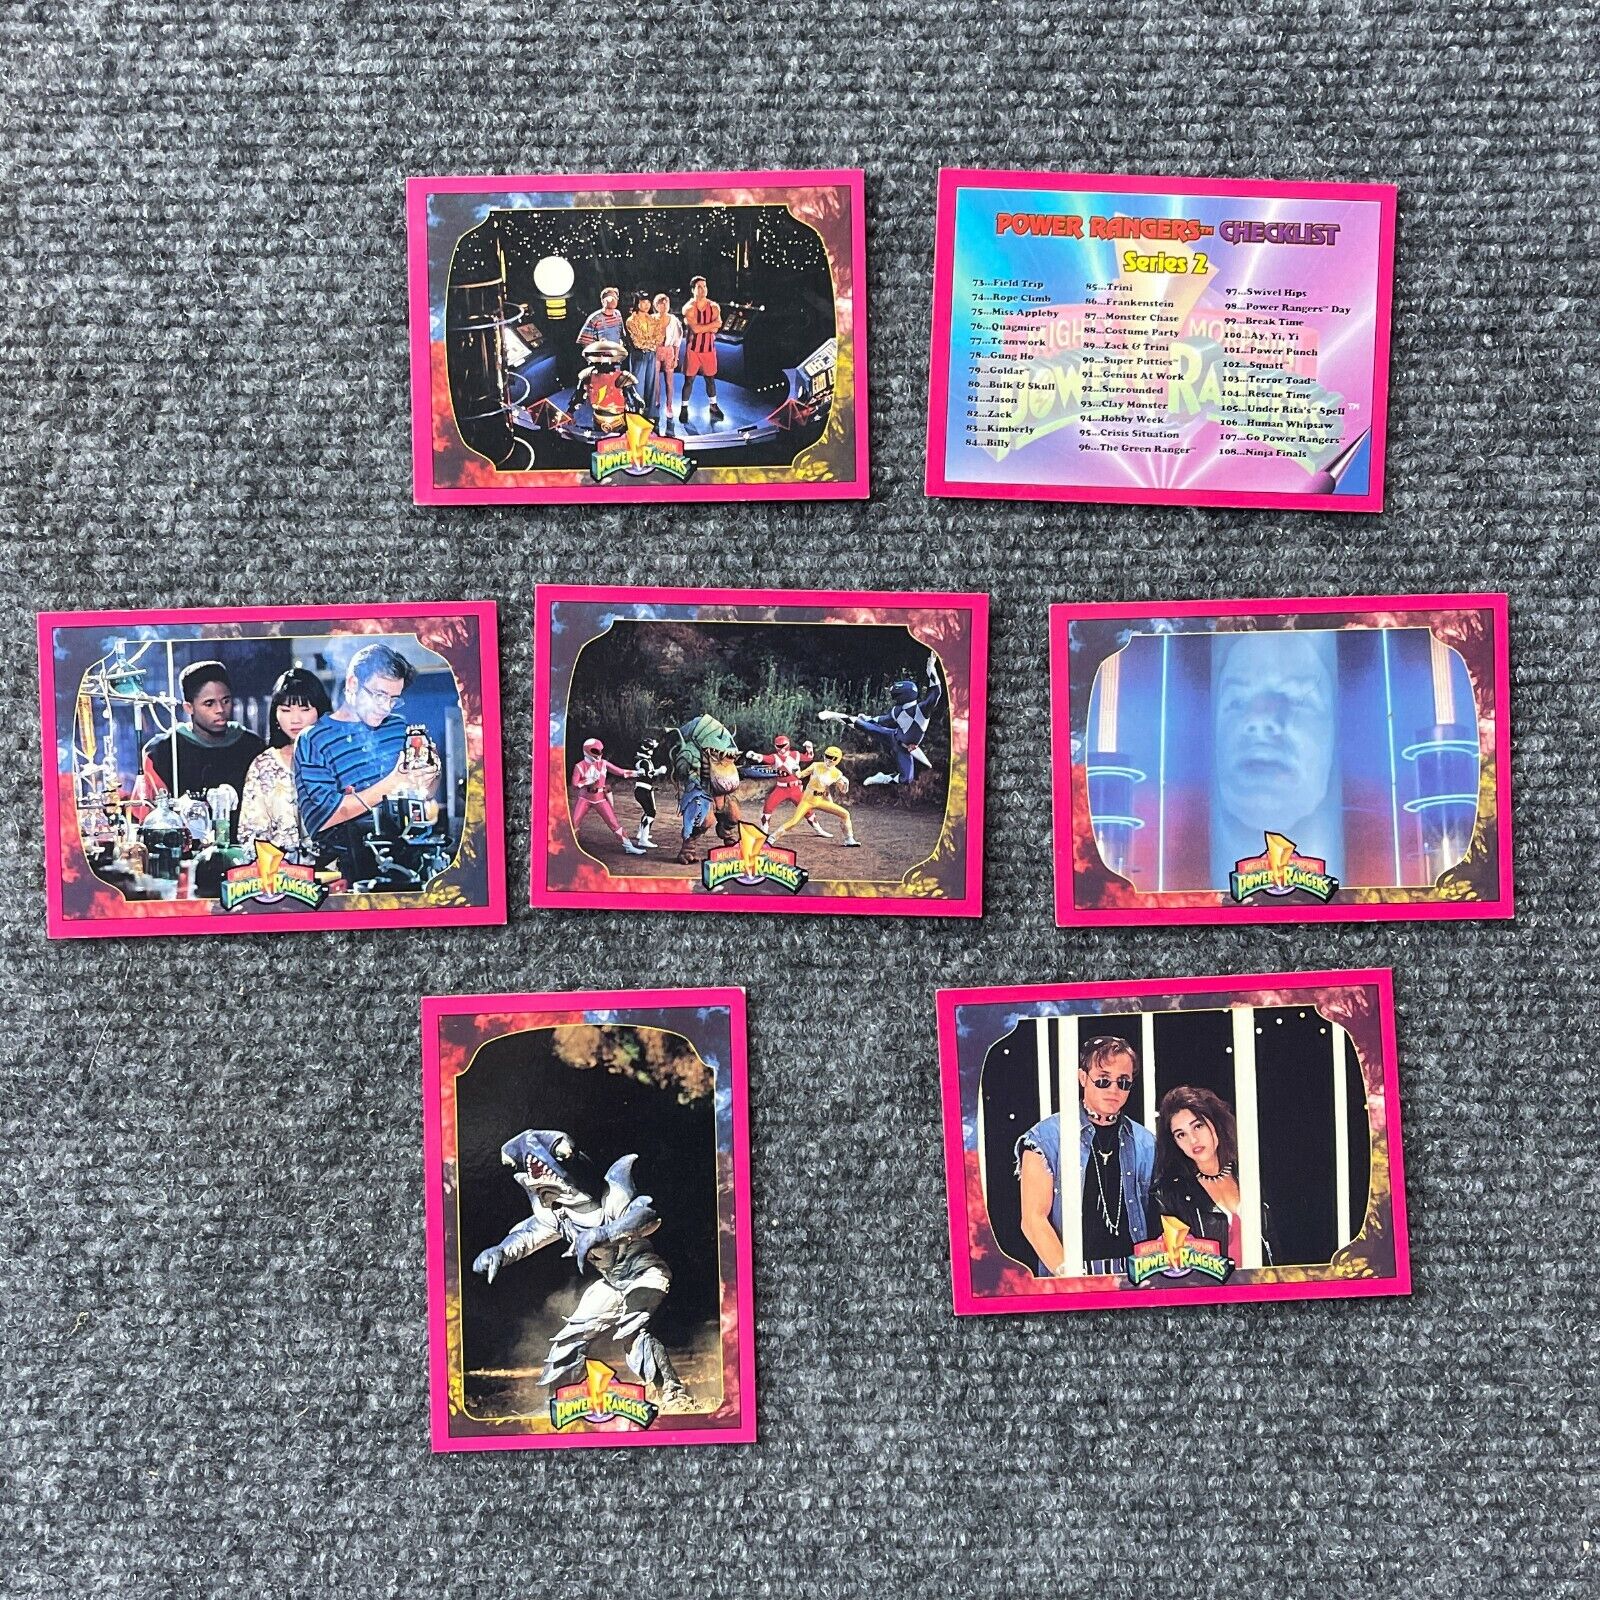 Vintage Mighty Morphin Power Rangers Trading Cards Lot of 7 1994 Saban